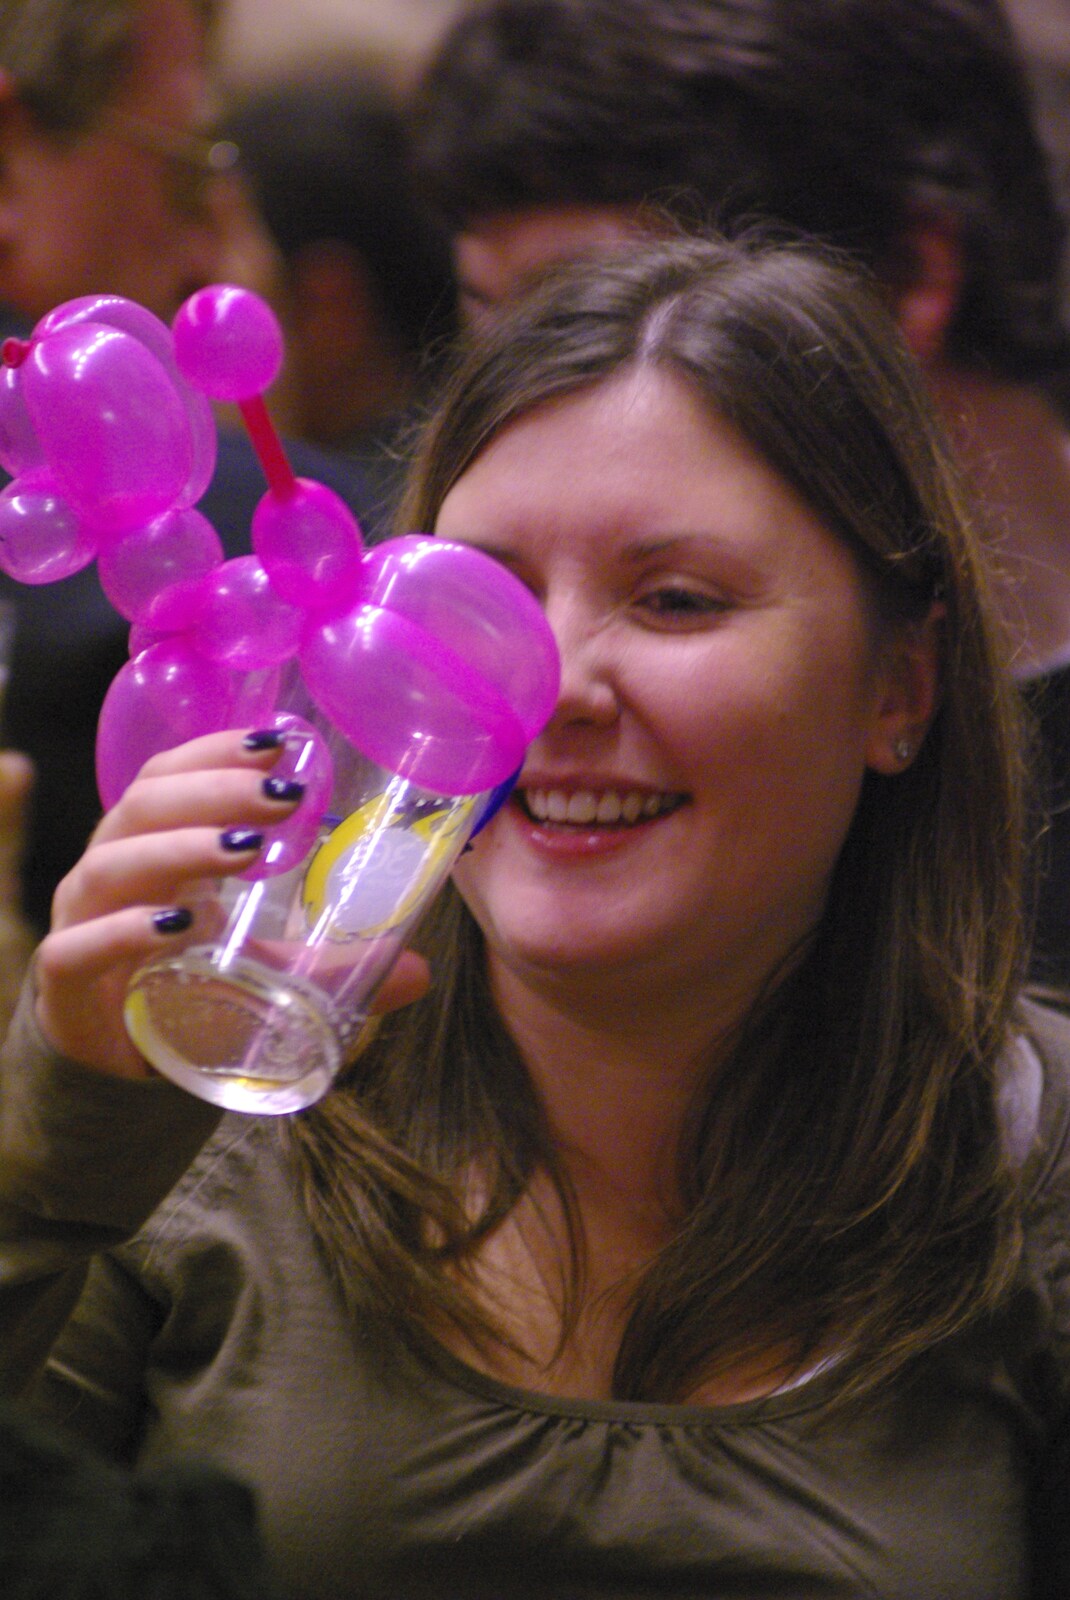 Rachel has her glass pimped out with balloons from The Brome Swan at the 30th Norwich Beer Festival, Norfolk - 24th October 2007